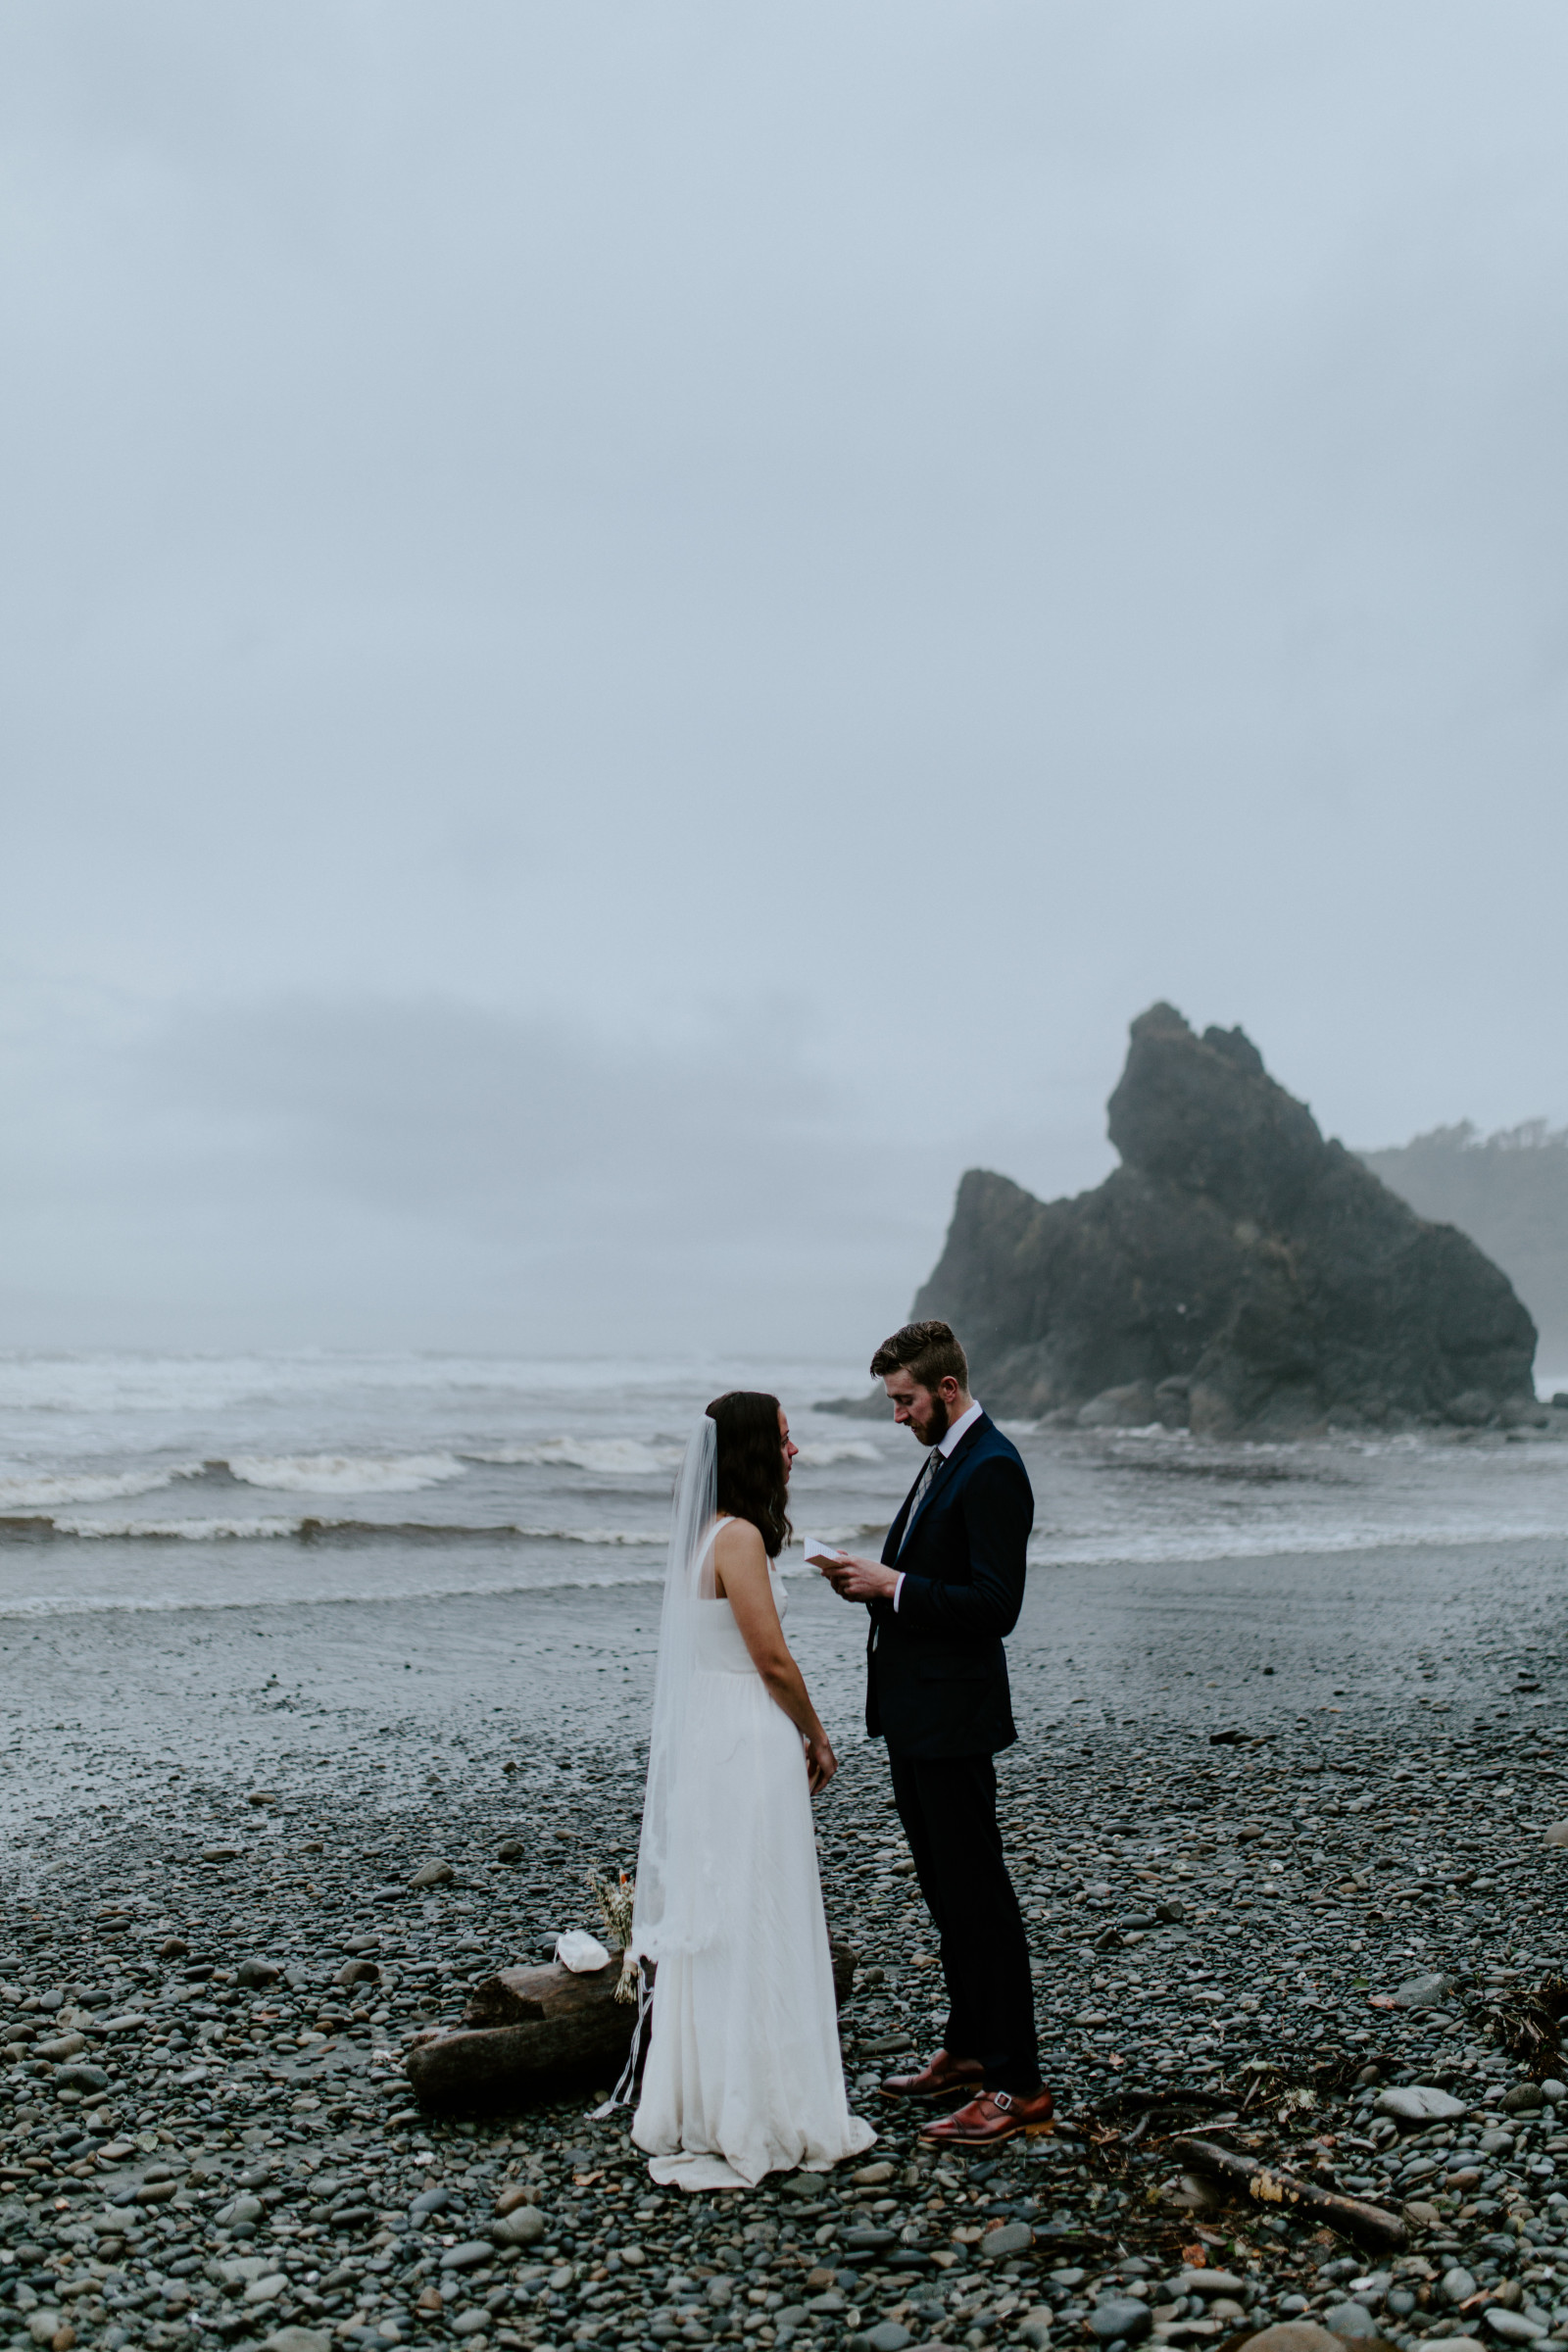 Mollie and Corey during their elopement ceremony. Elopement photography in the Olympic National Park by Sienna Plus Josh.